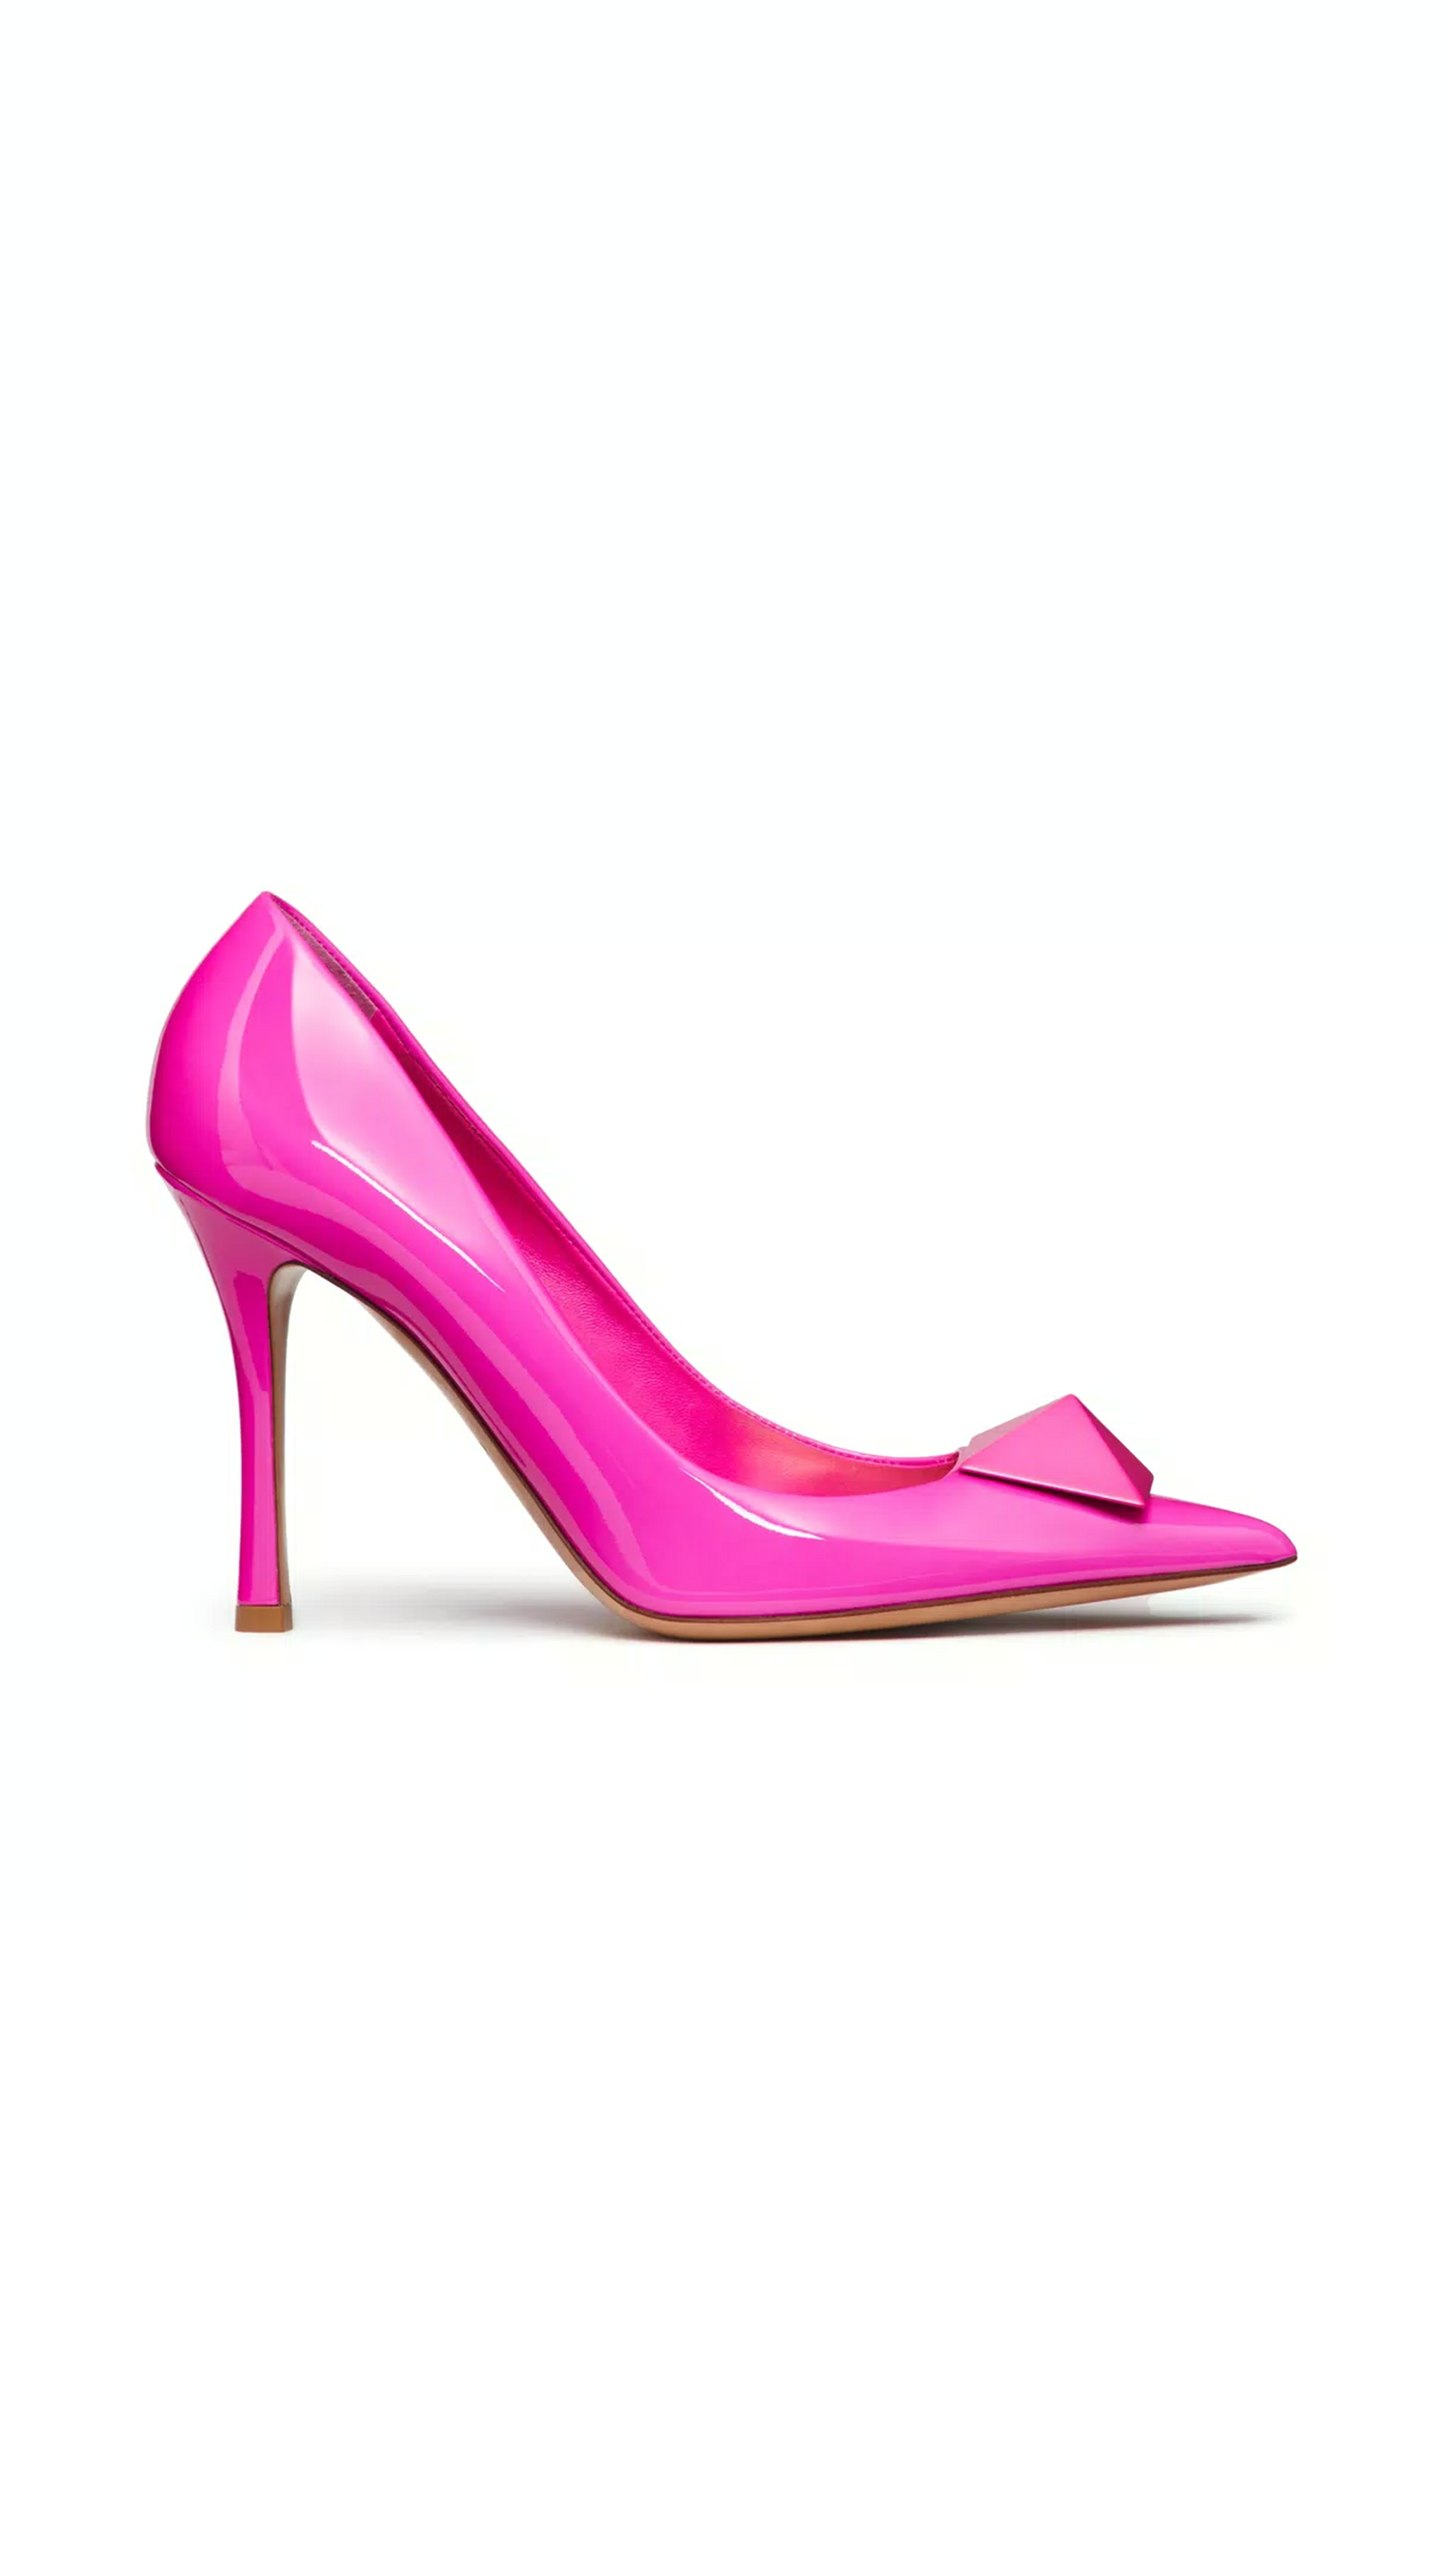 One Stud Patent Leather Pump with Matching Stud - Pink PP